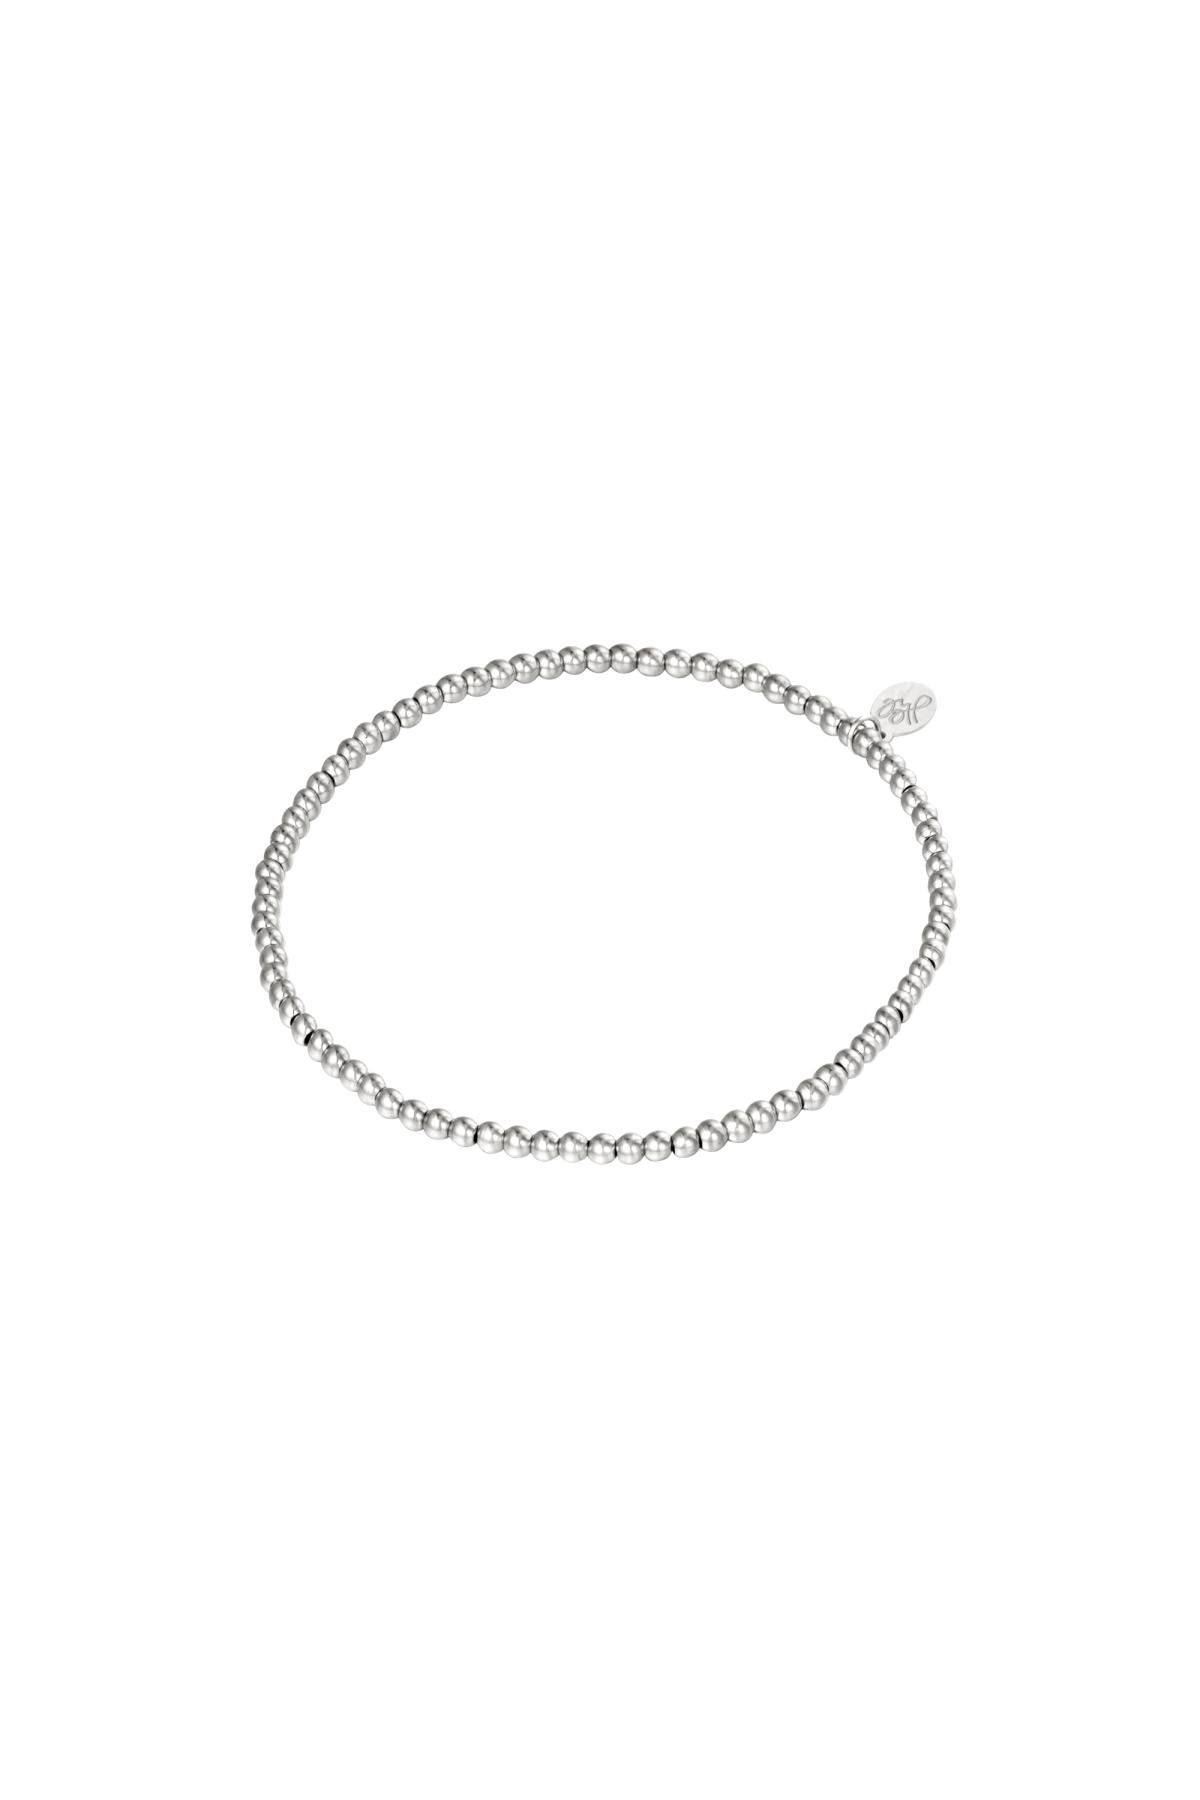 Bracelet Small Beads Silver Stainless Steel-2.5MM